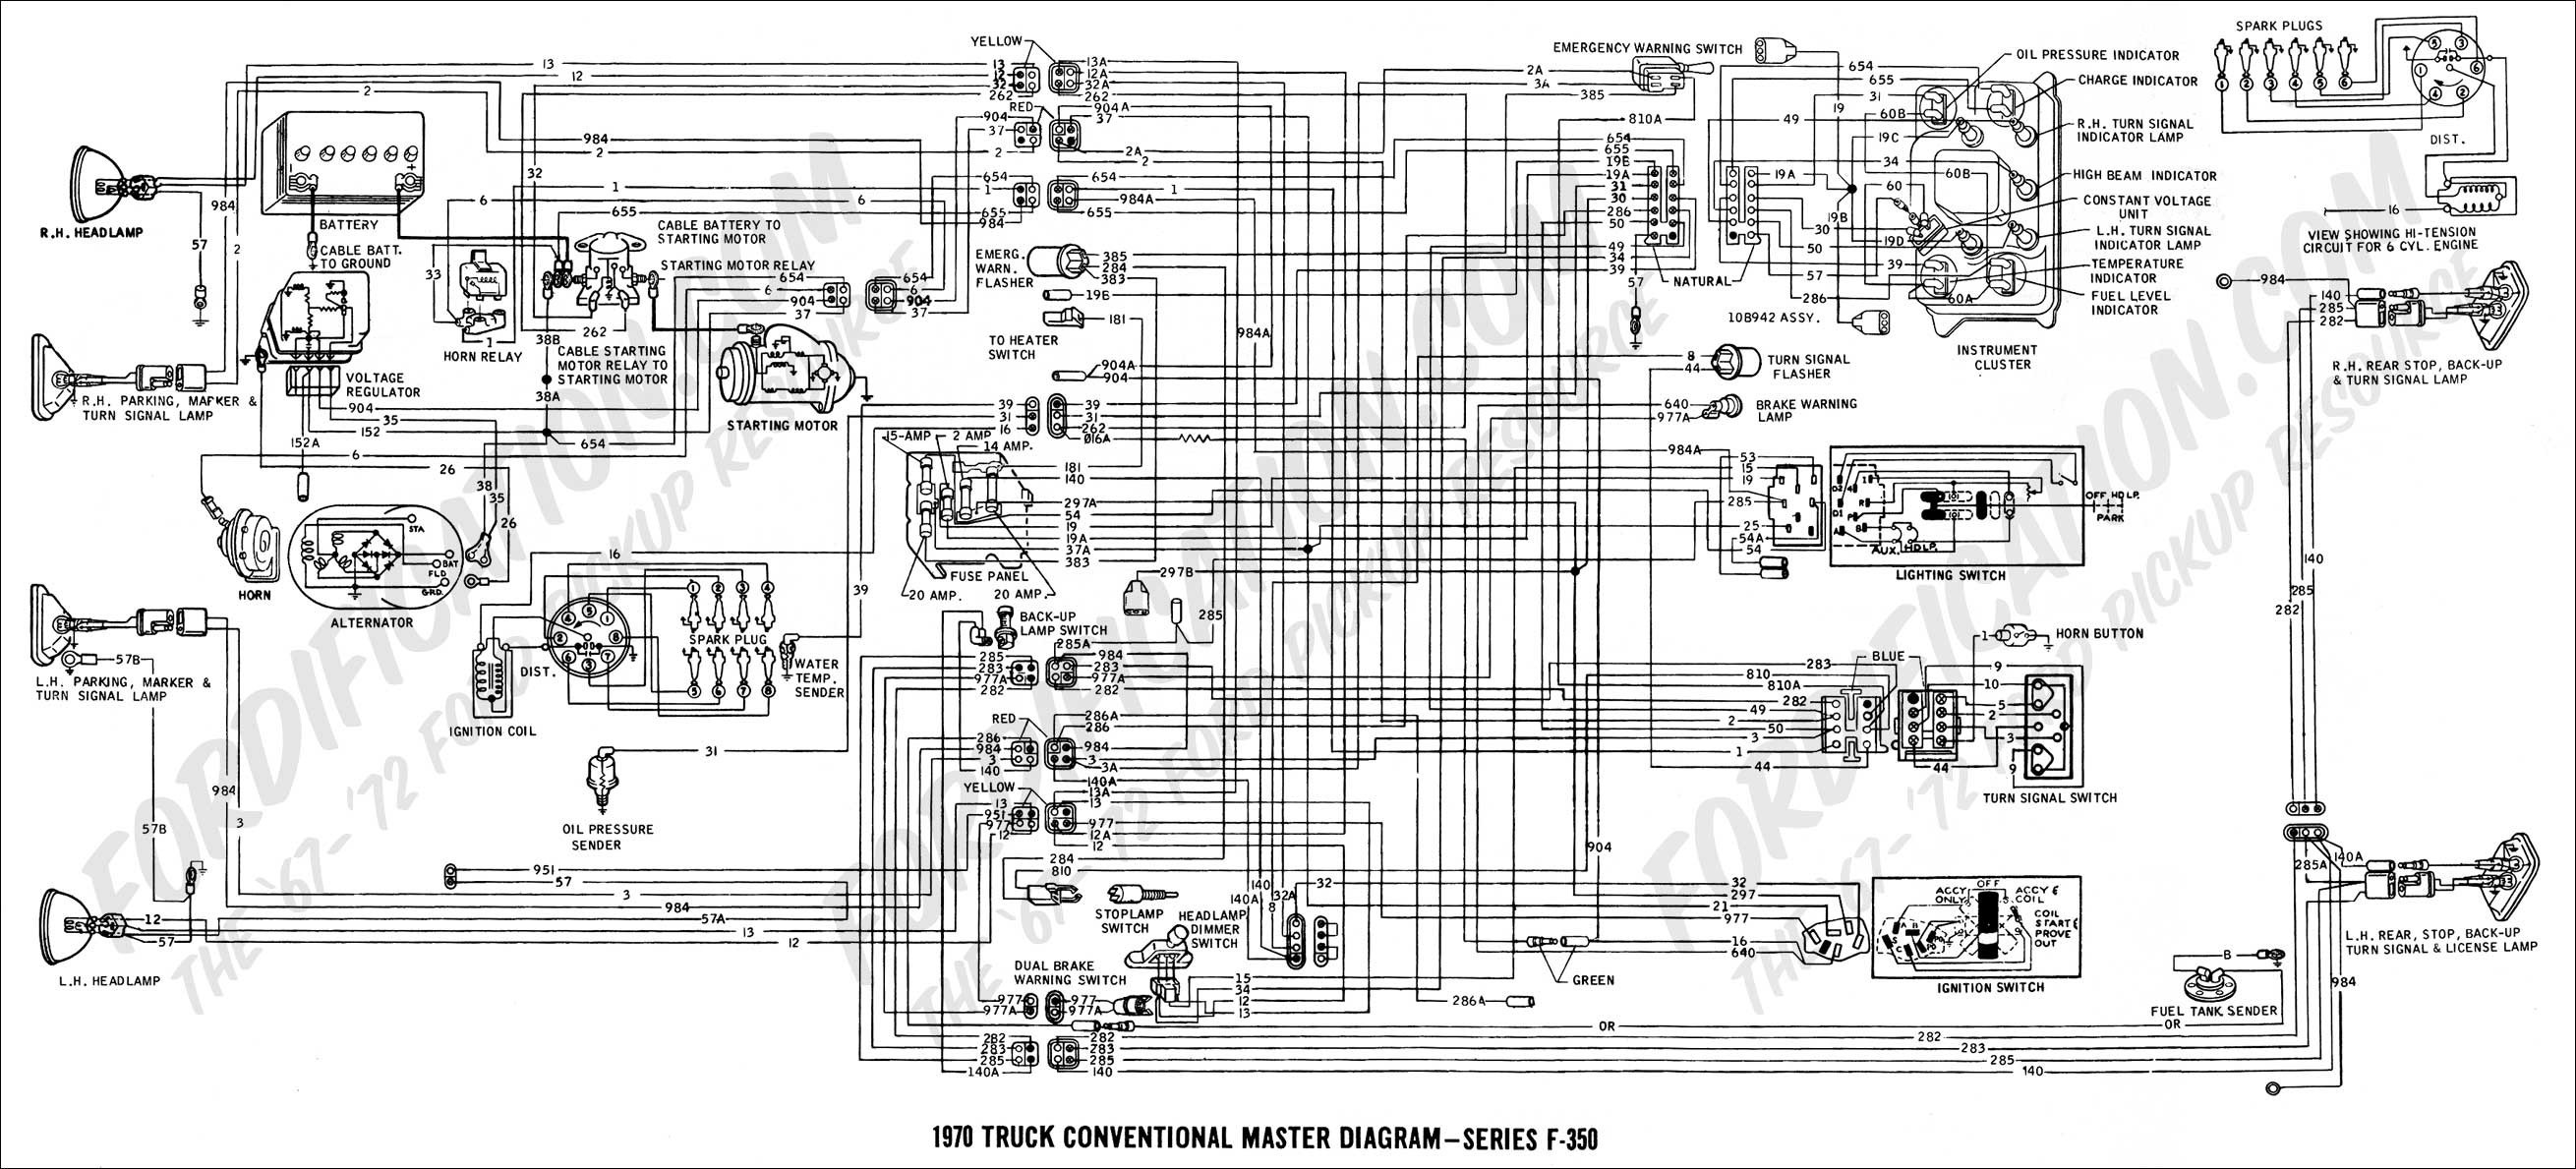 Ford Focus Engine Parts Diagram Civic Wiring Harness Diagram as Well as 2008 ford F 250 Mirror Of Ford Focus Engine Parts Diagram